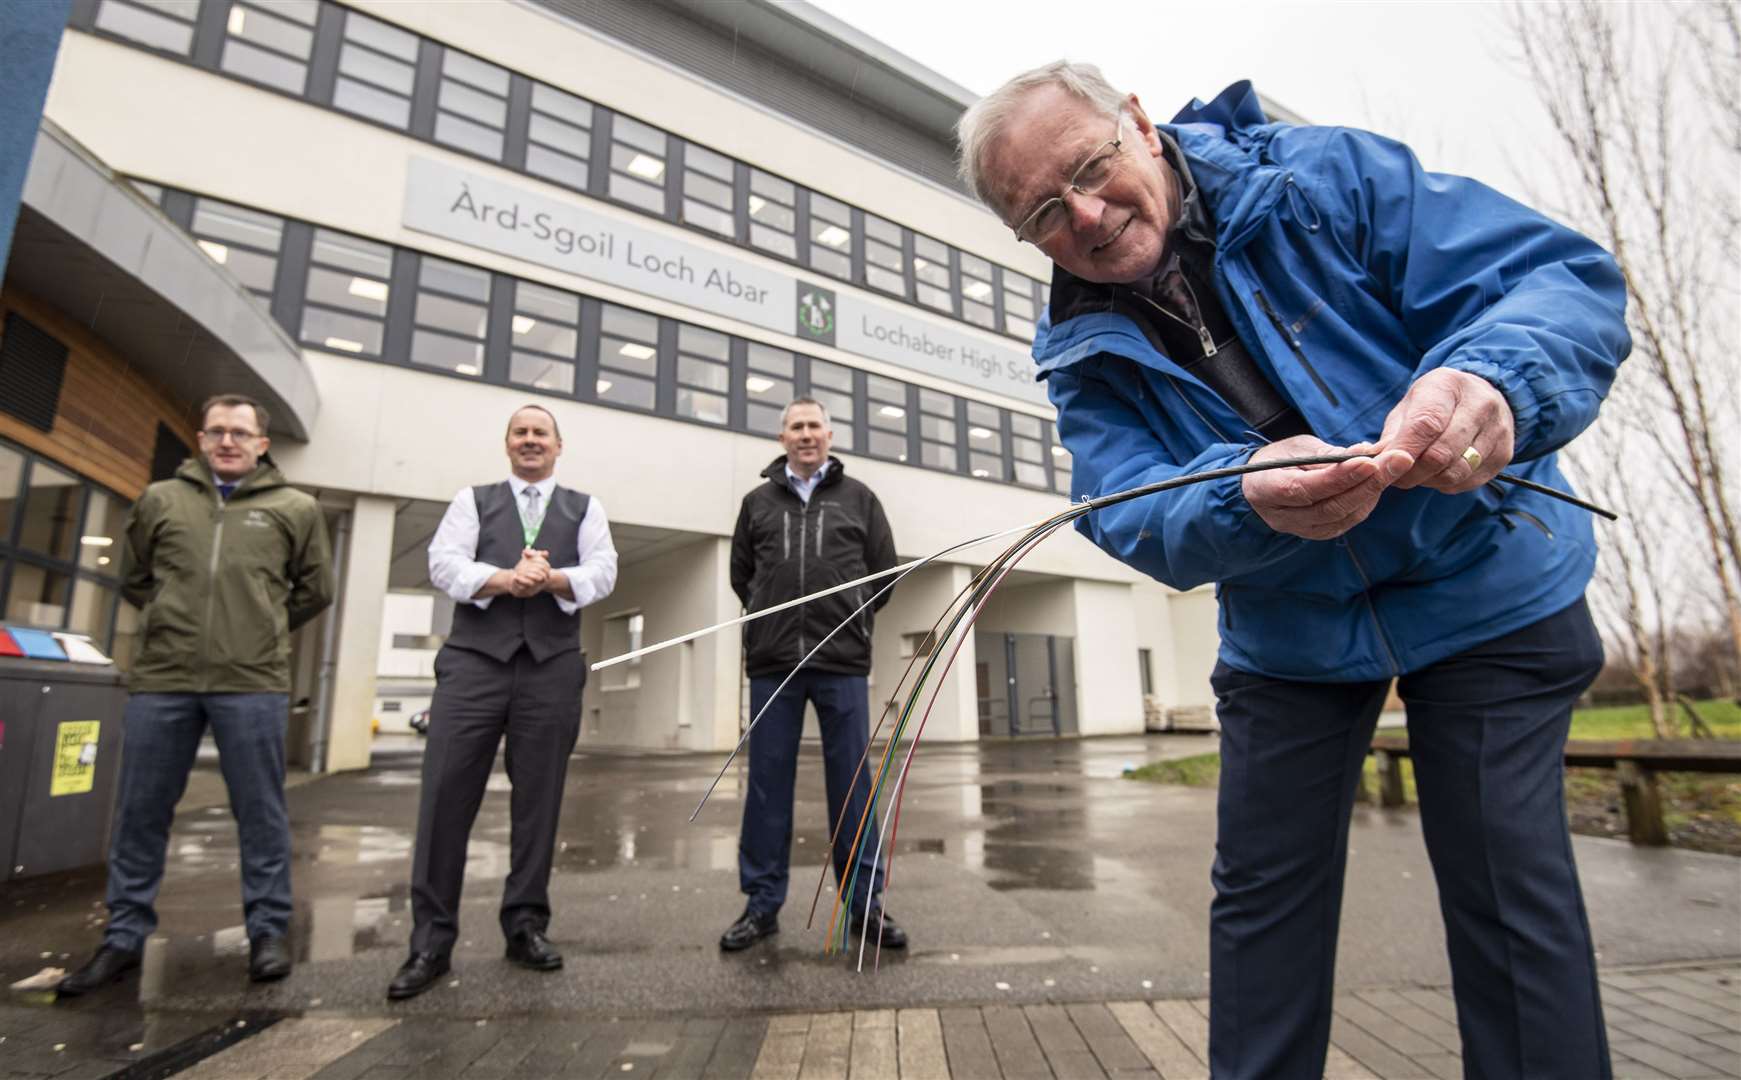 (left to right) Michael Kelly, UK Government’s Department of Culture, Media and Sport, Lochaber High School Head Teacher Scott Steele, HIE’s Scott Dingwall and Chair of Highland Council’s Strategic Communities and Place Committee, Cllr Allan Henderson.